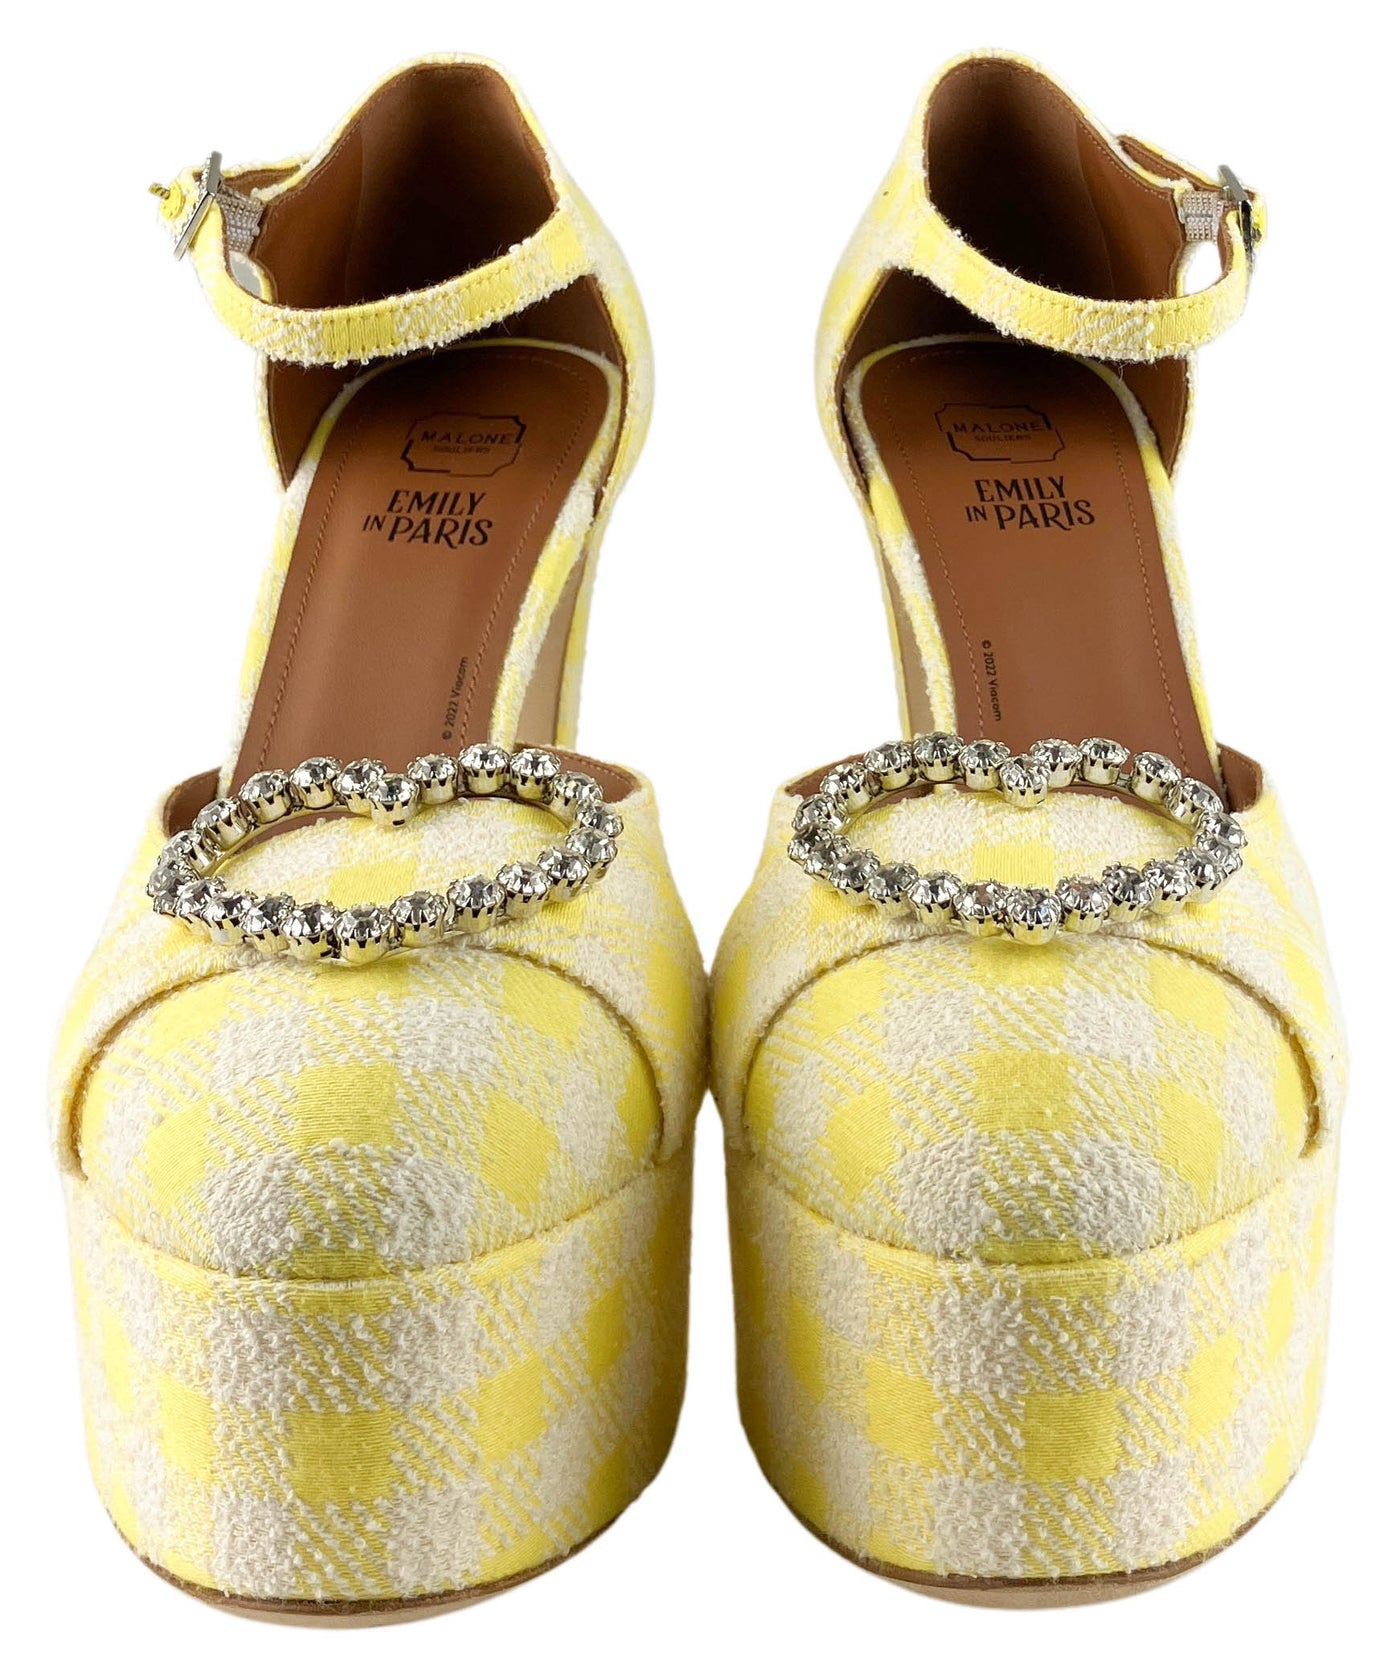 Malone Souliers Camile Platform Heels in Yellow - Discounts on Malone Souliers at UAL